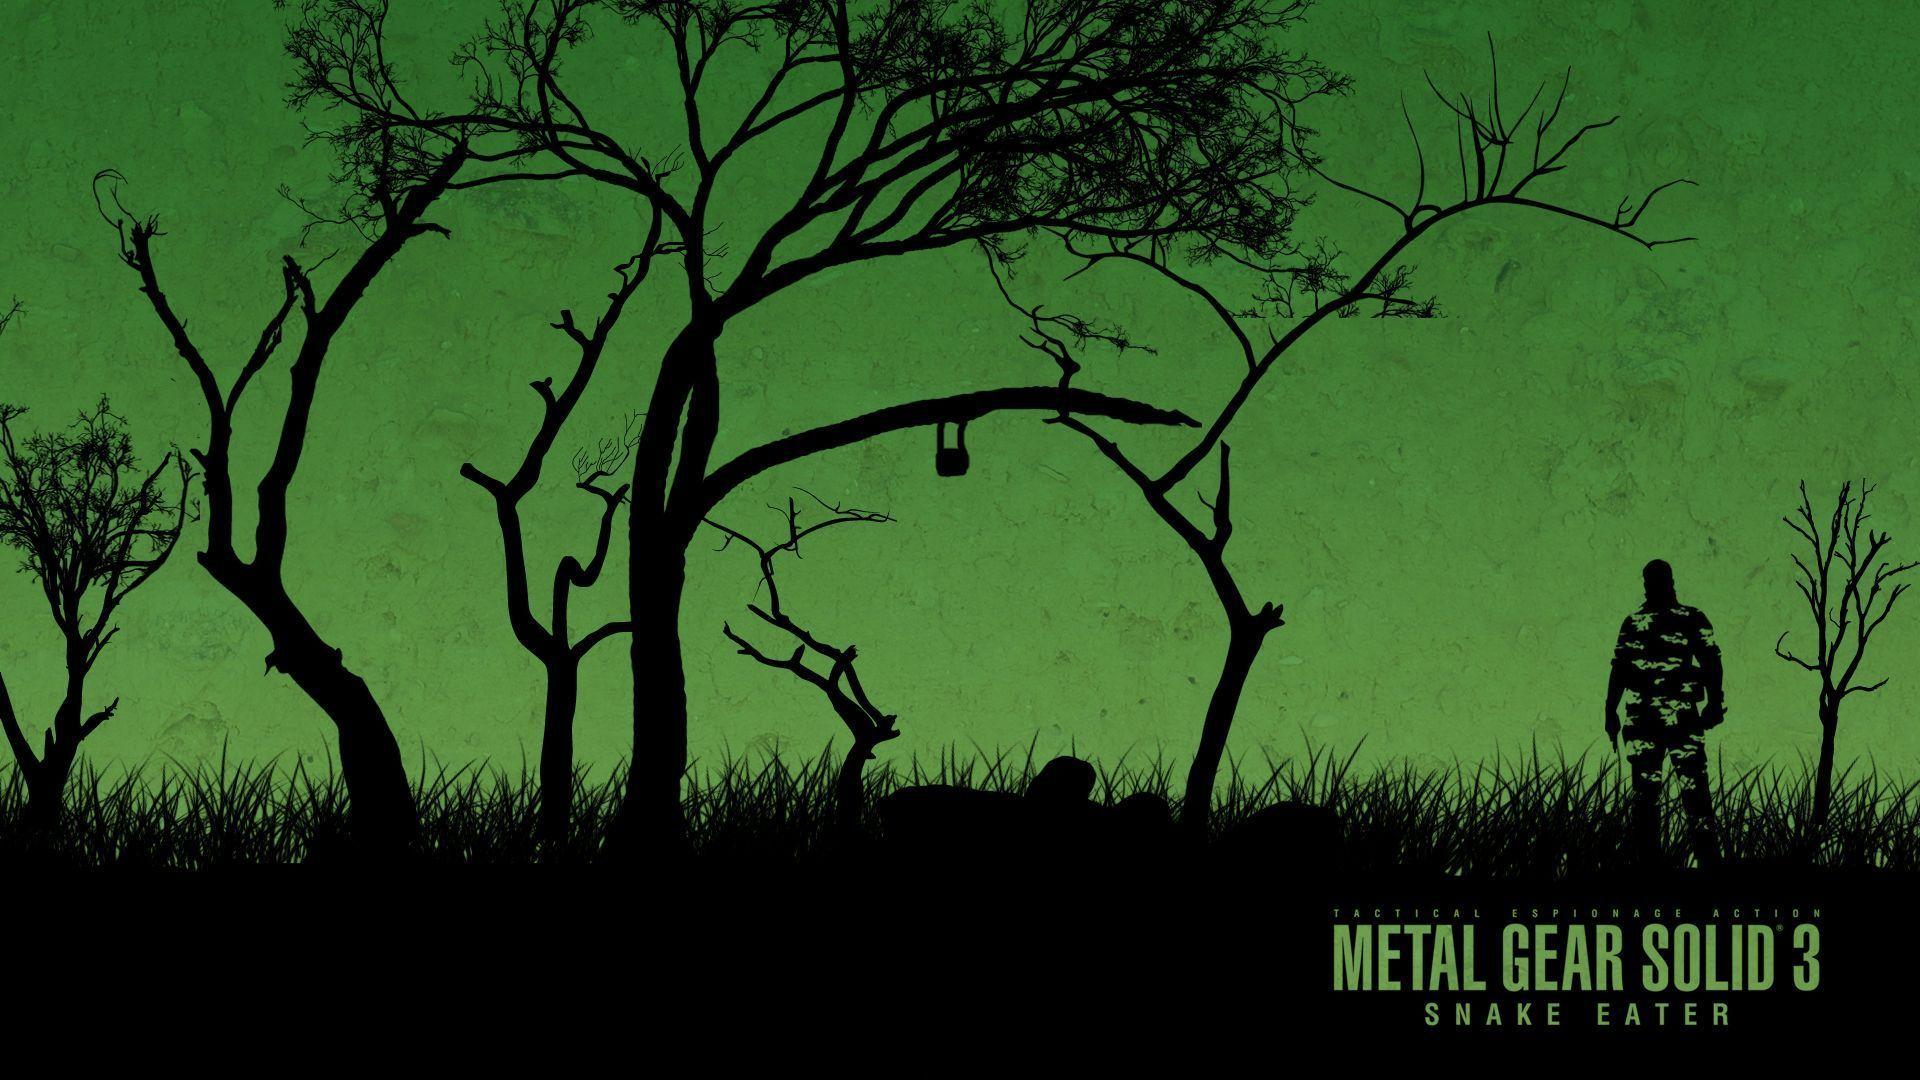 Metal Gear Solid 3 Wallpapers Hd Image & Pictures